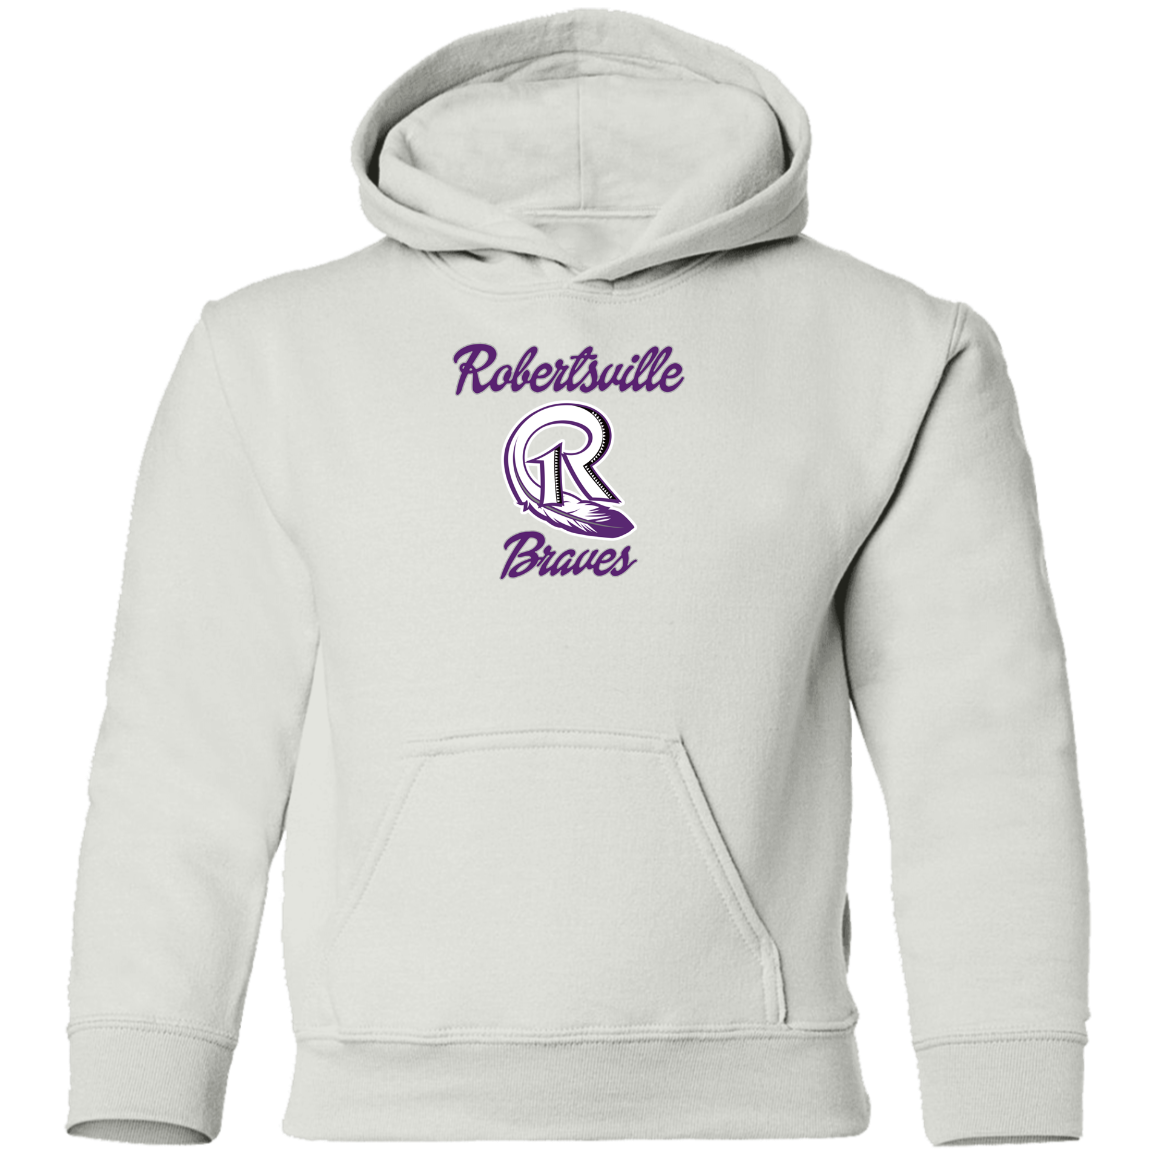 Braves - Youth Pullover Hoodie